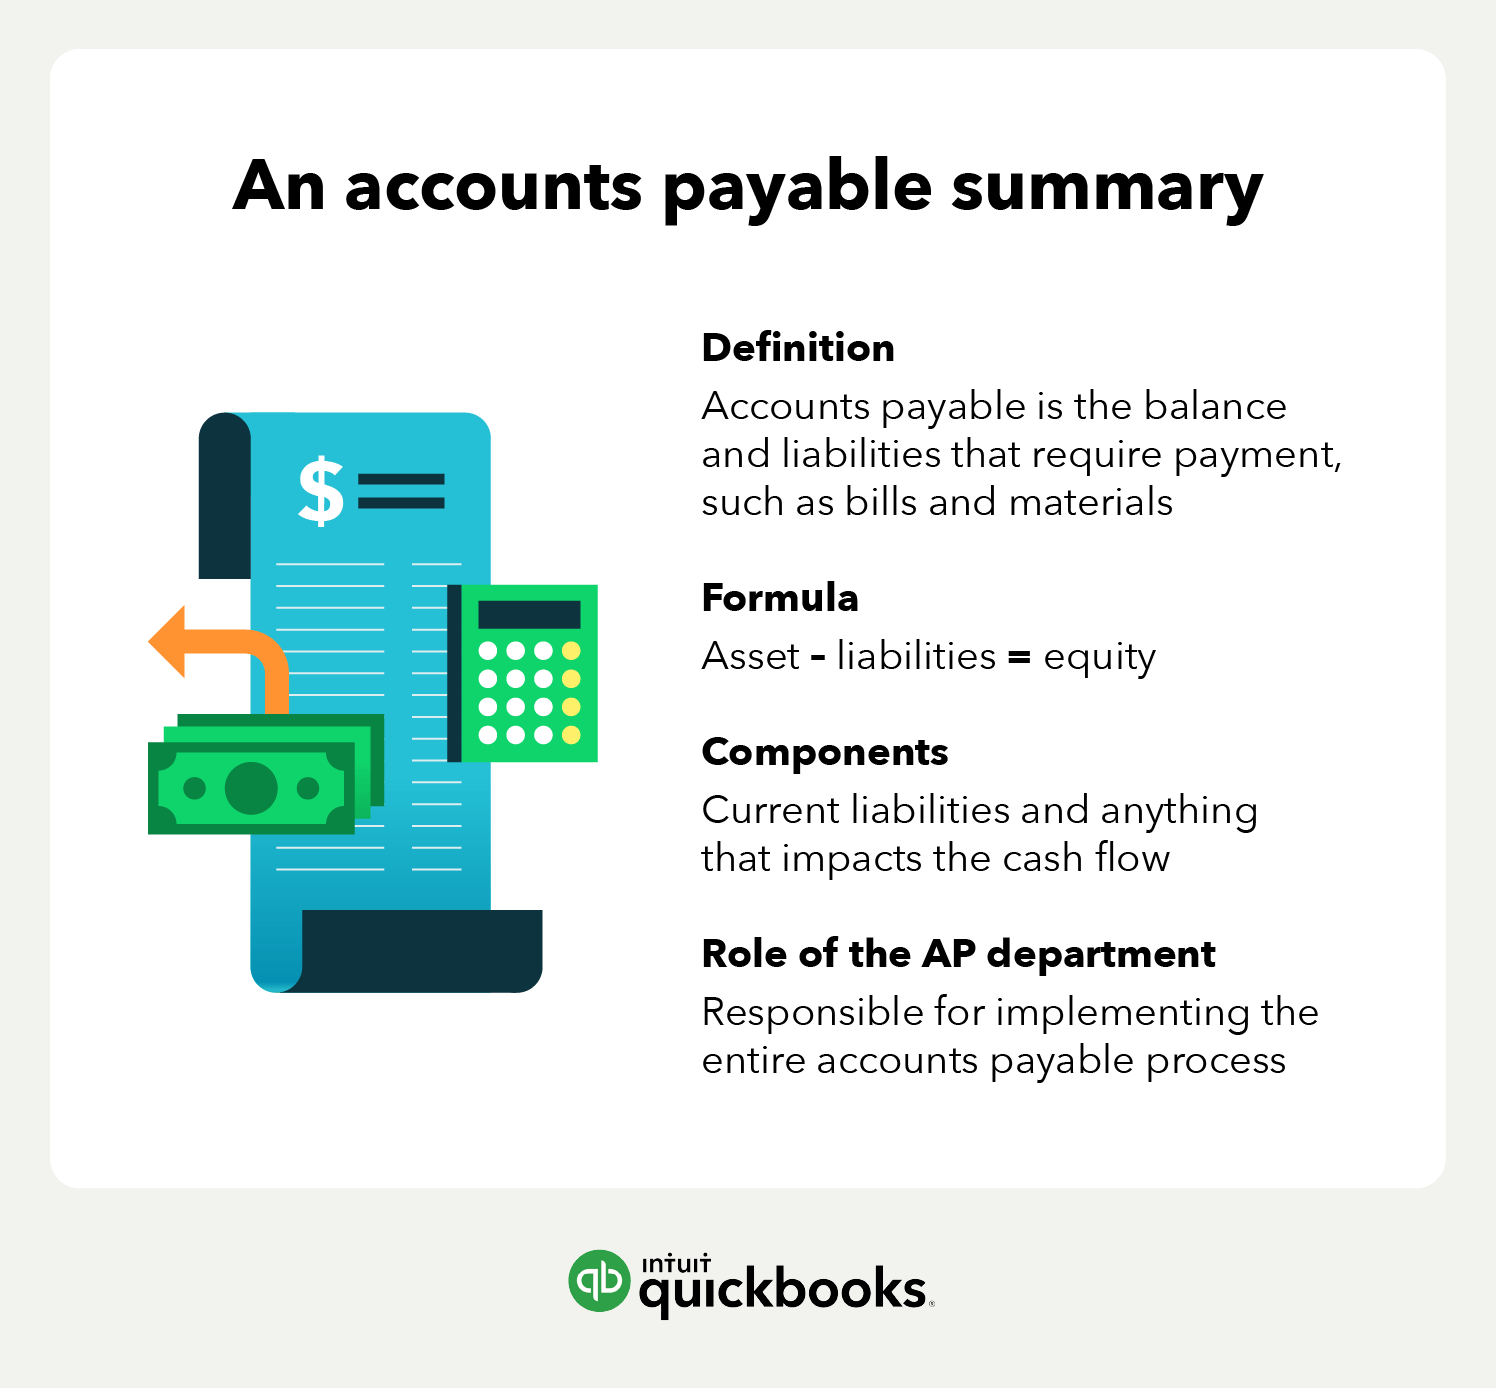 Accounts payable summary including definition, formula, components, and the role of the AP department.